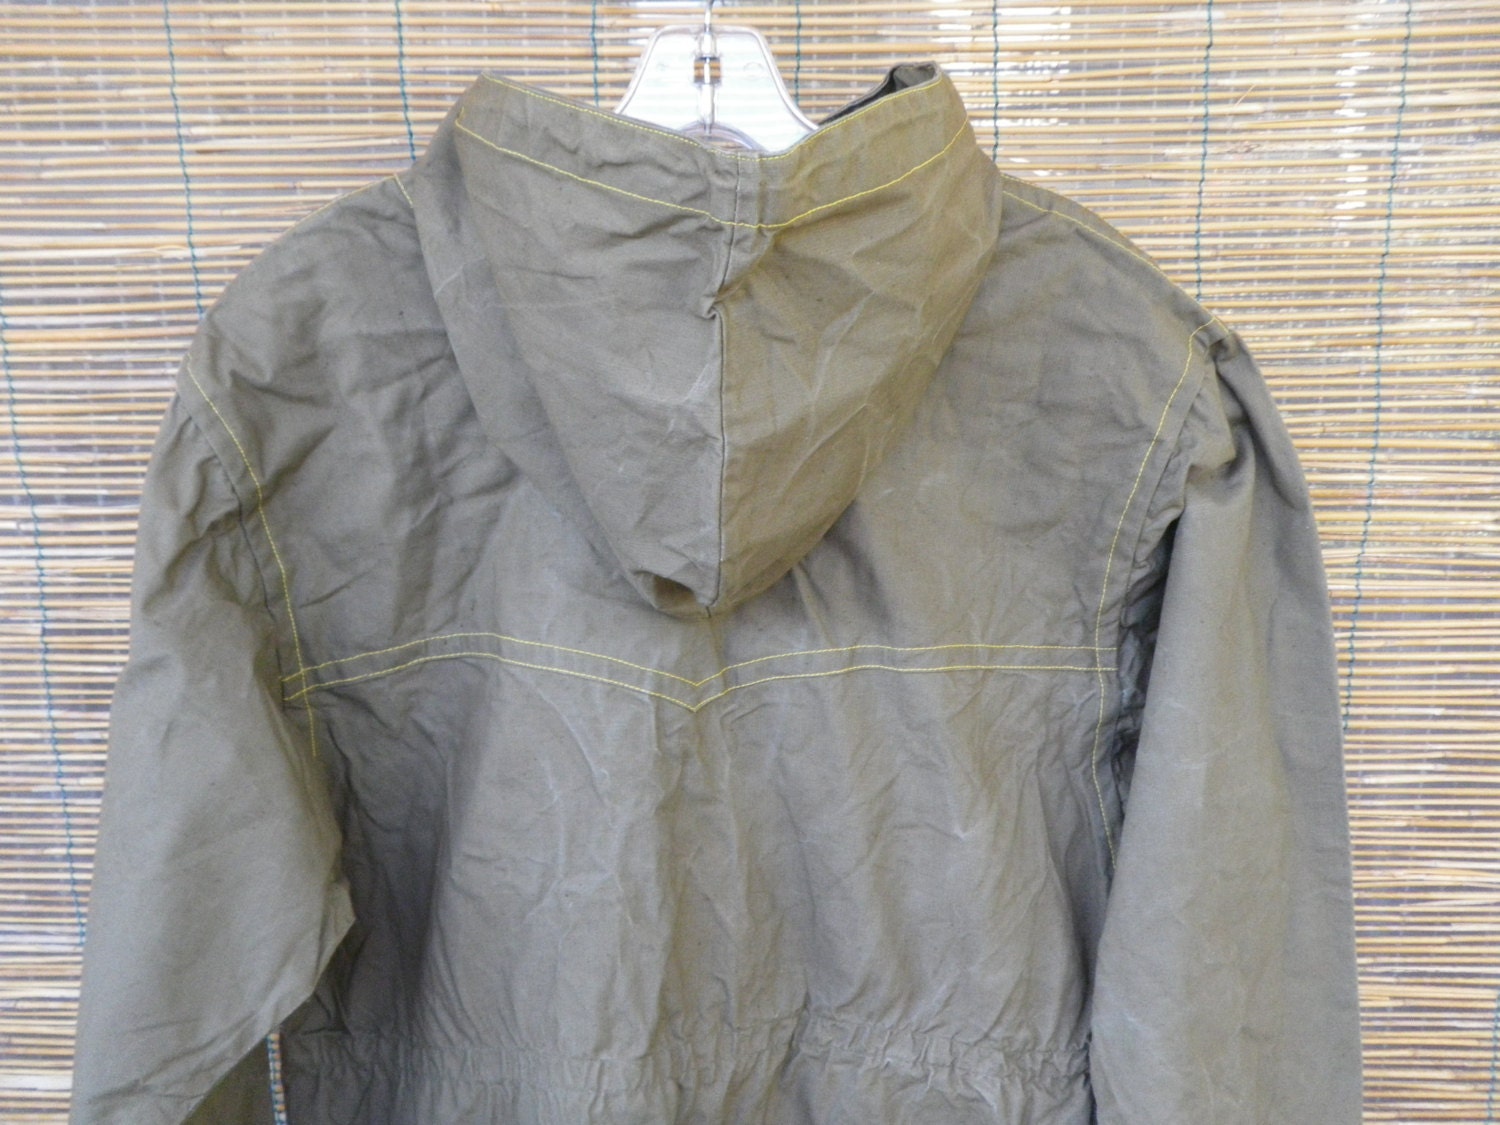 Vintage 1970s Military Green Canvas Anorak With Hood